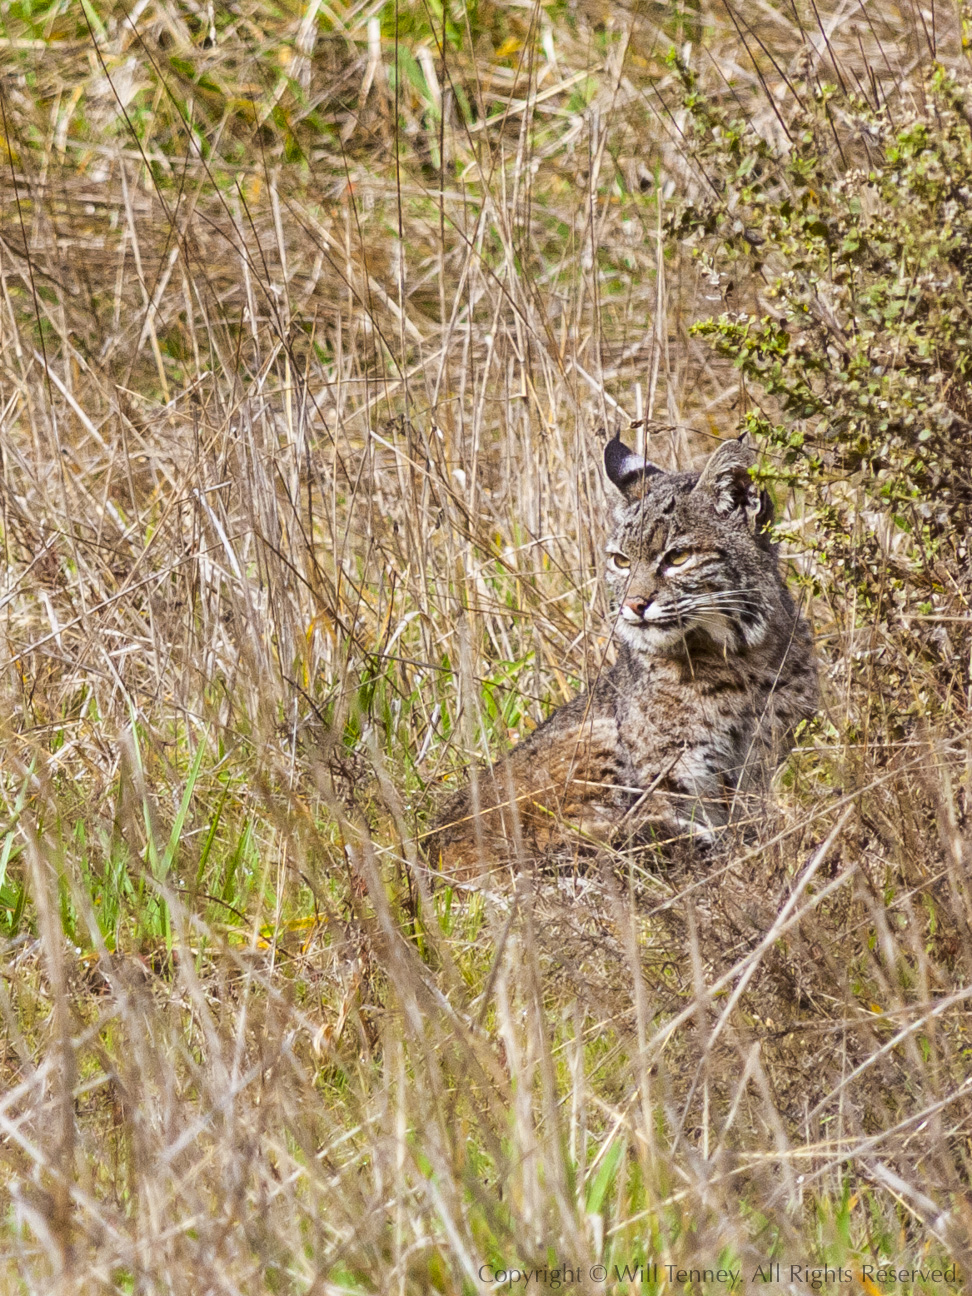 Point Reyes Bobcat: Photograph by Will Tenney